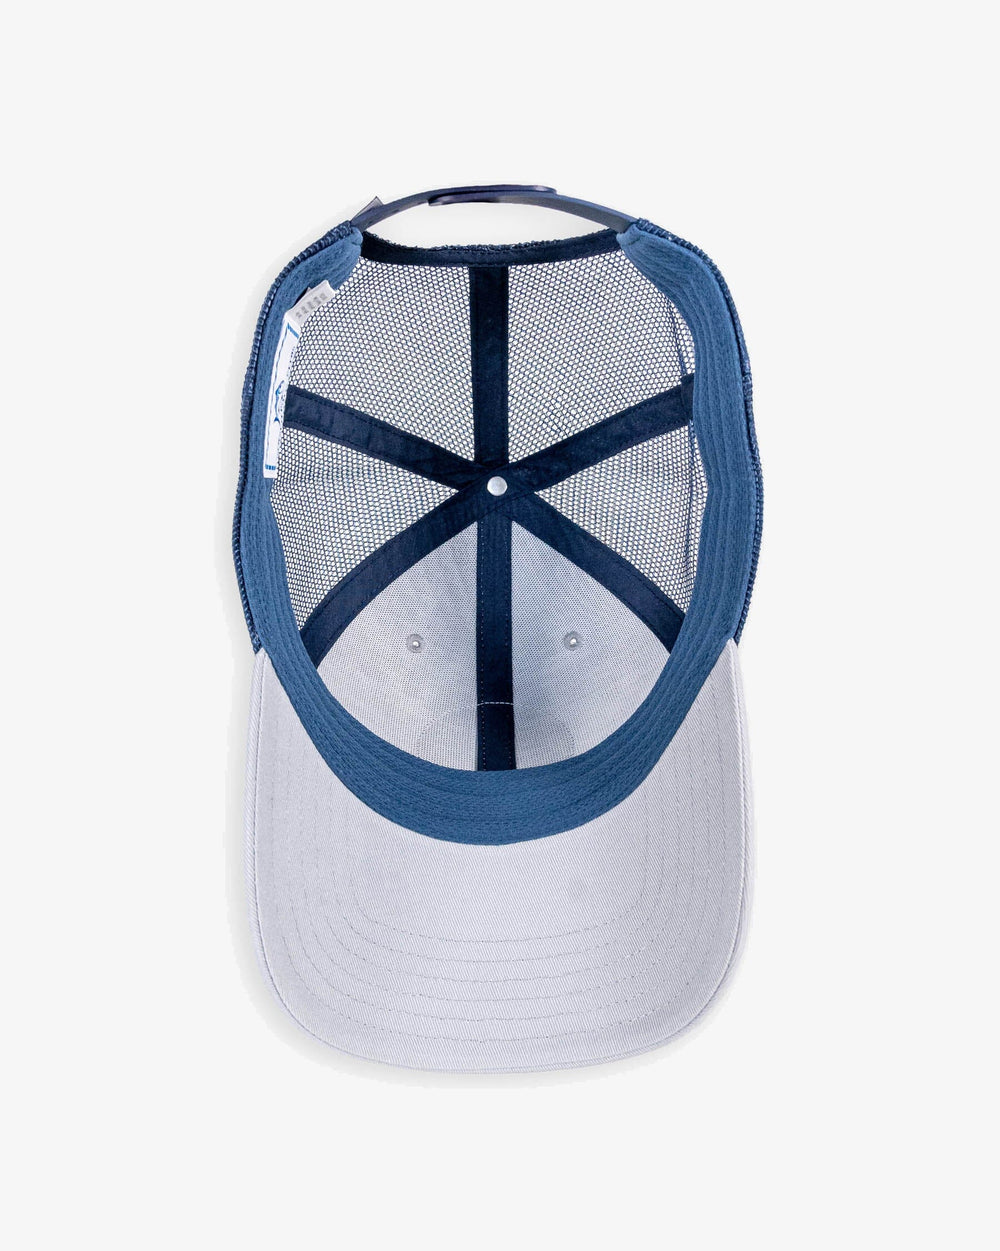 The detail view of the Southern Tide Southern Tide Authentic Badge Trucker Hat by Southern Tide - Light Grey